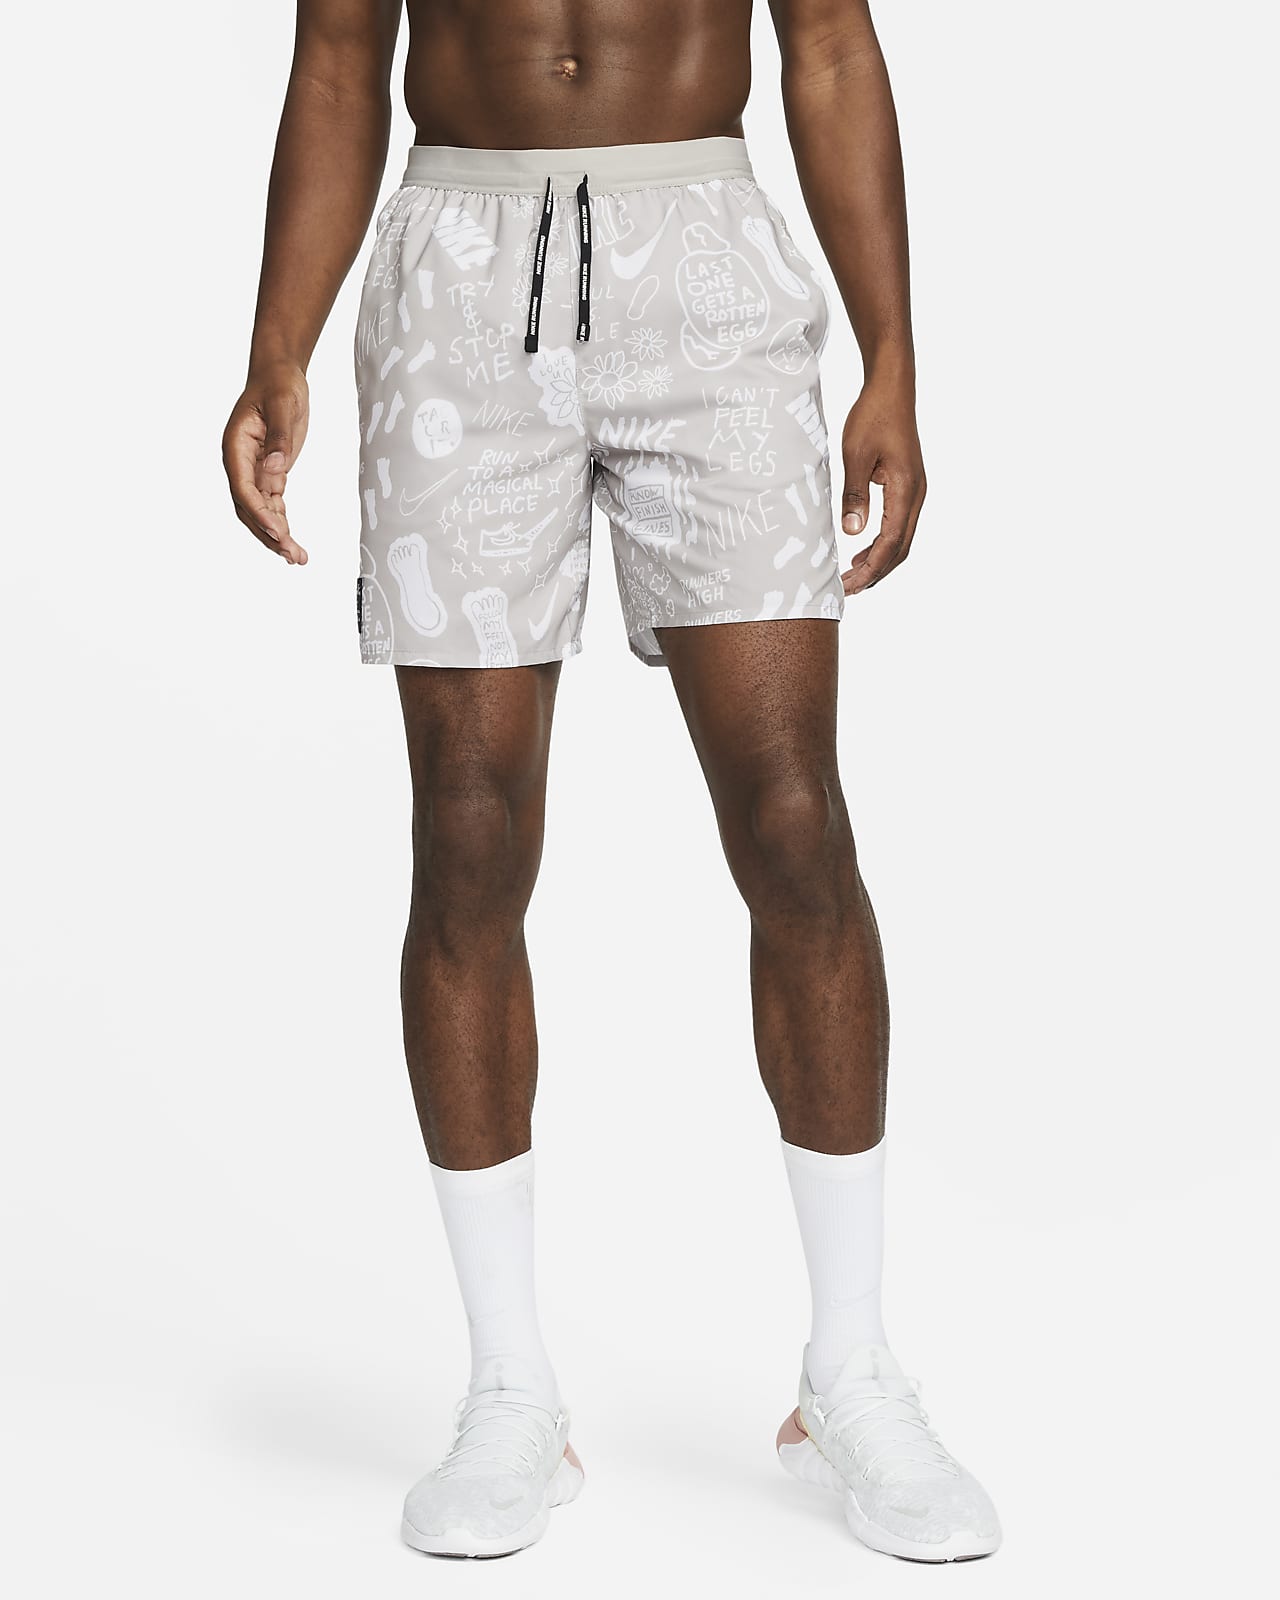 Nike Flex Stride A.I.R.Nathan Bell Men's 18cm (approx.) Printed Running Shorts